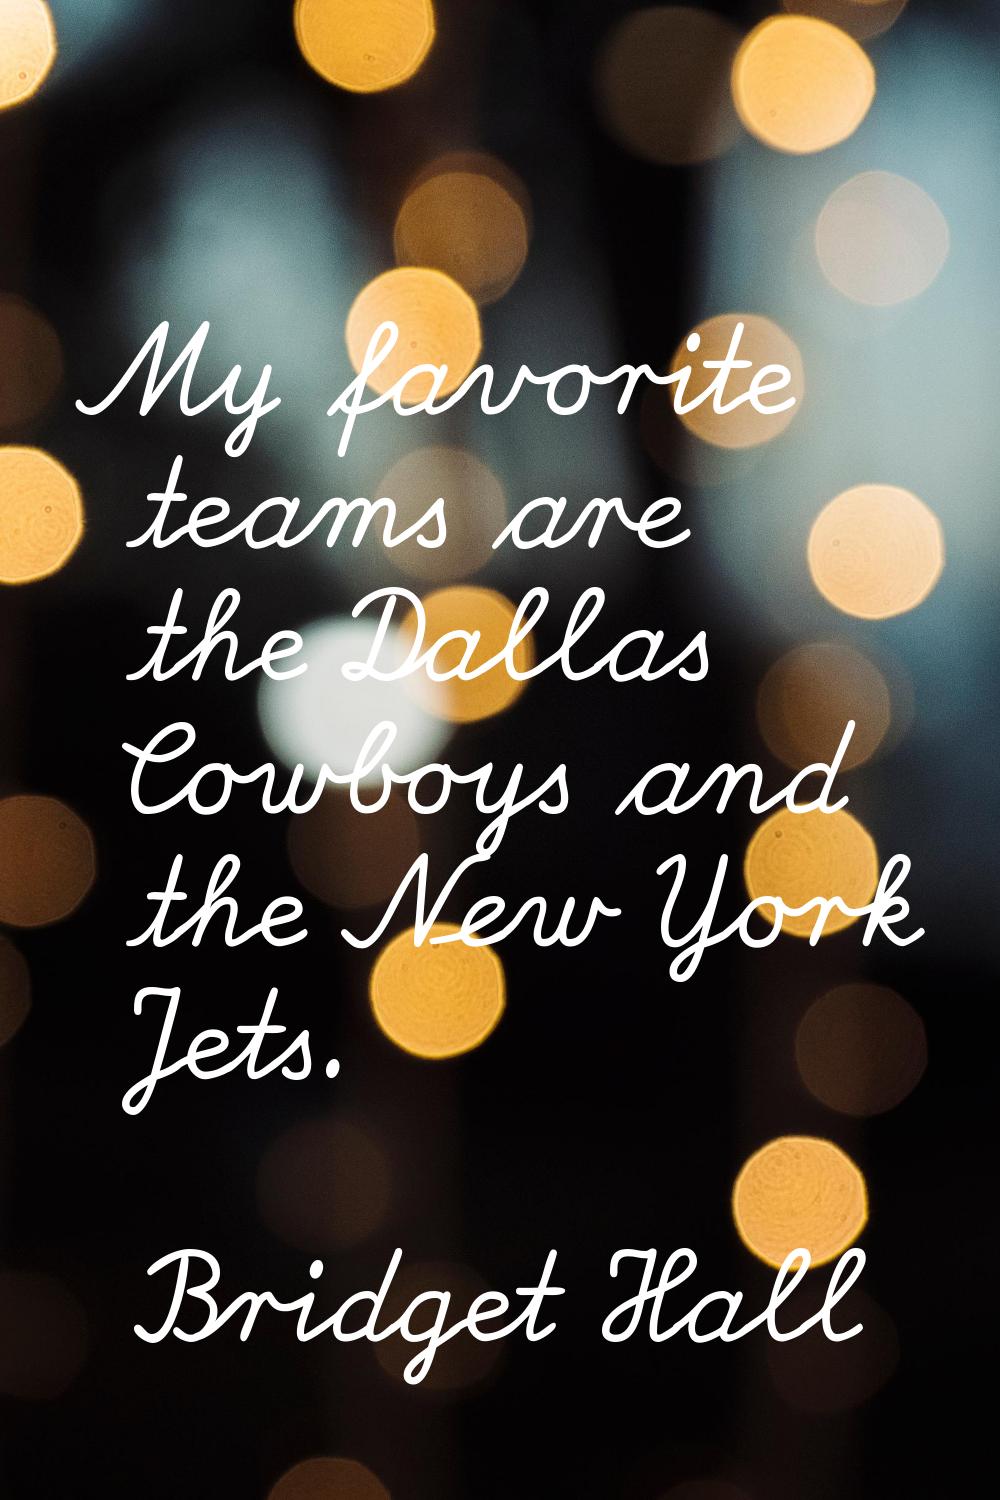 My favorite teams are the Dallas Cowboys and the New York Jets.